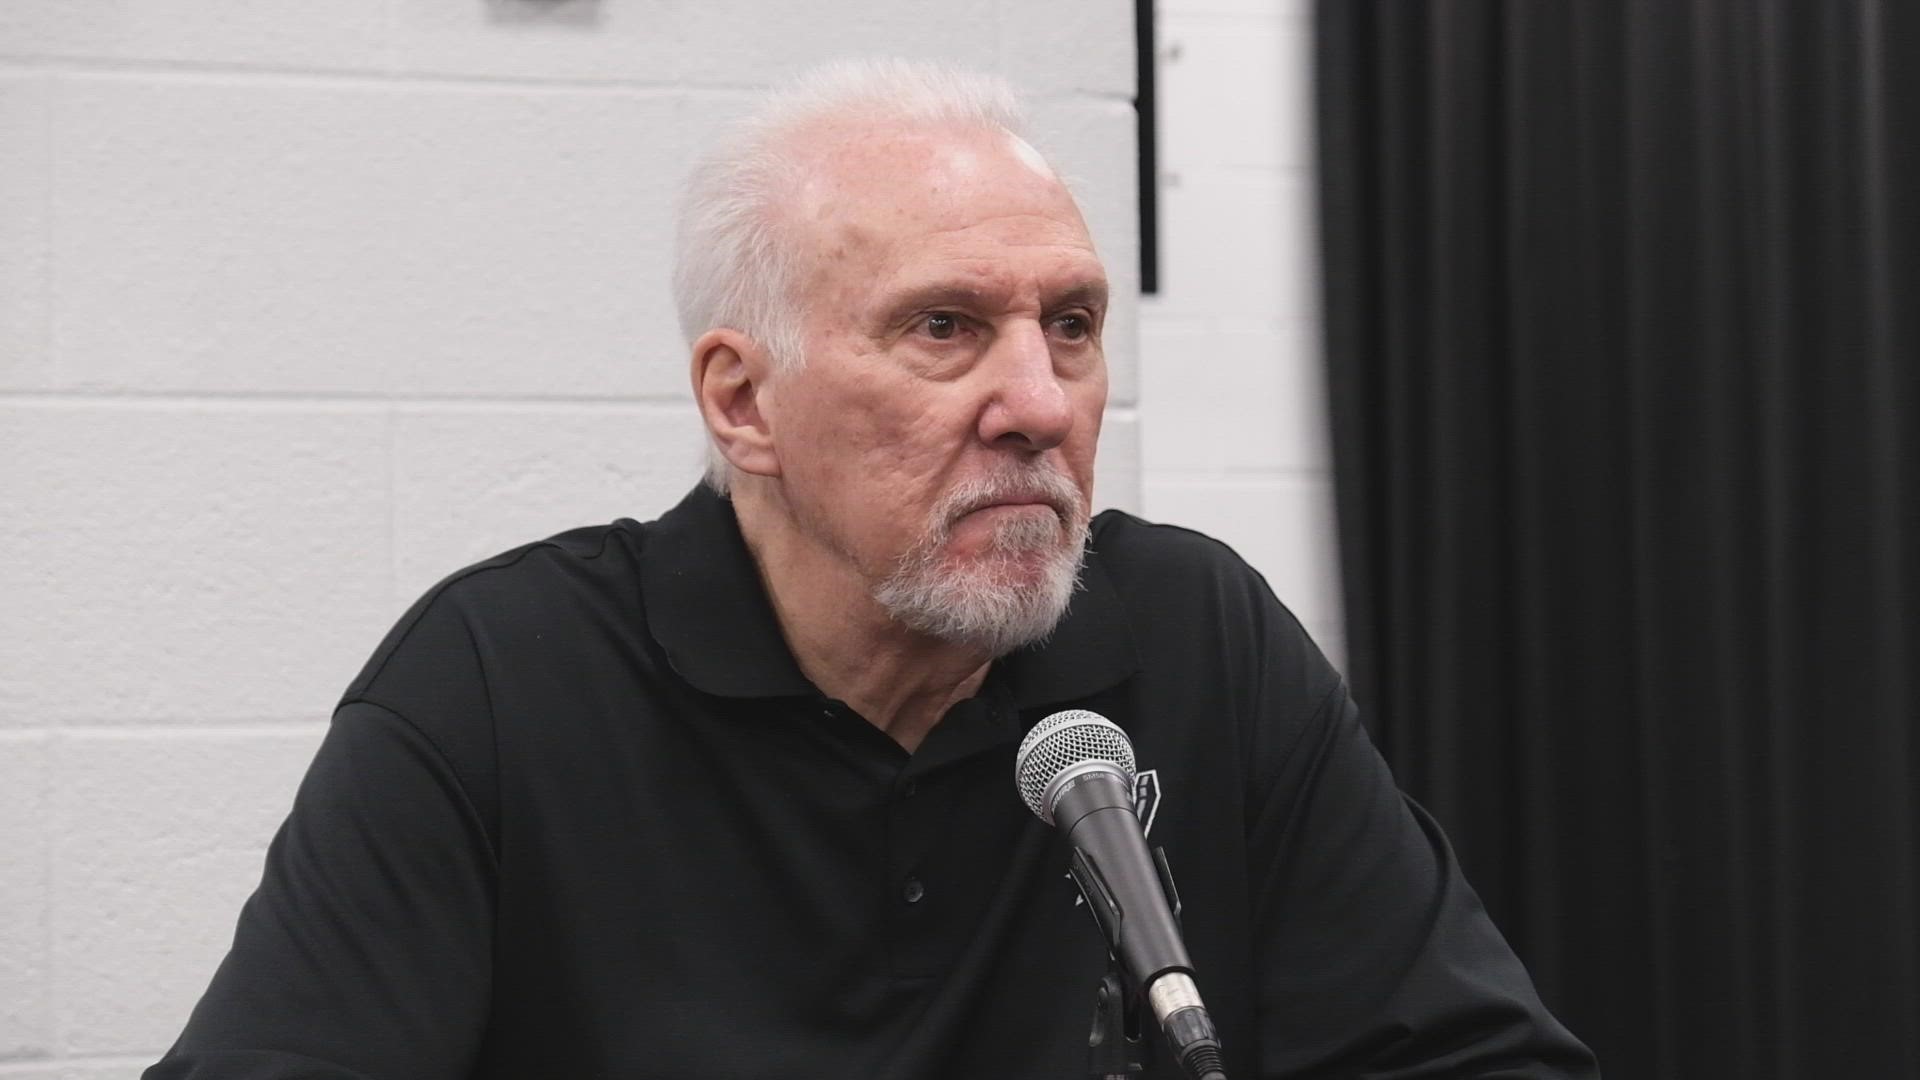 "No body hung their heads and they just kept on playing. That was the best part of the whole game," Popovich said, taking blame for late playcalling.